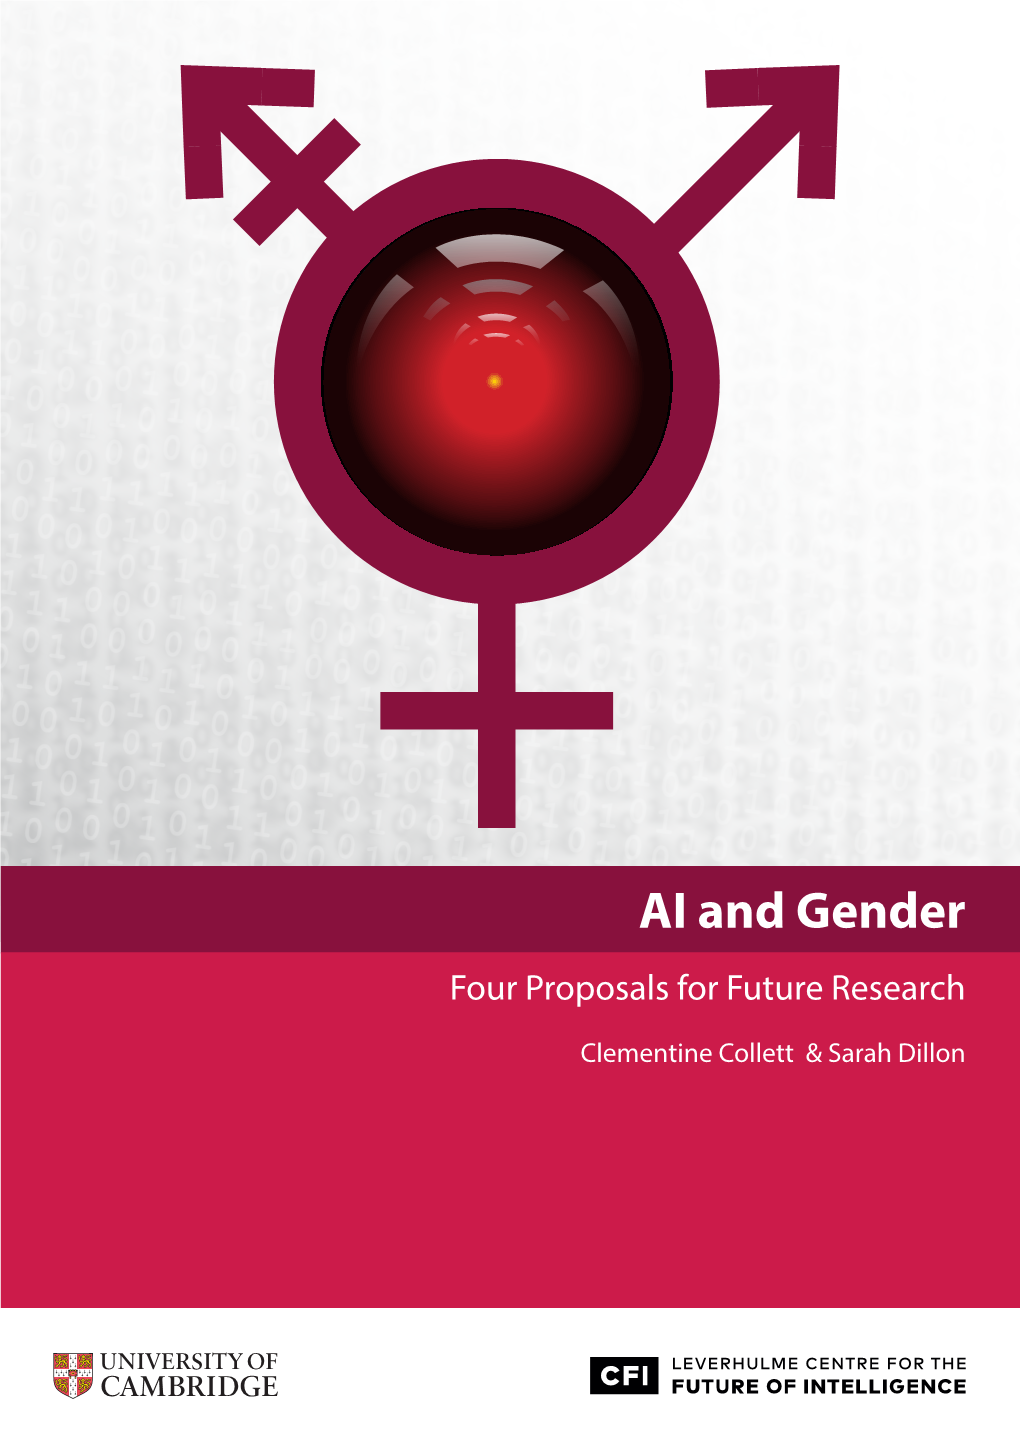 AI and Gender: Four Proposals for Future Research. Cambridge: the Leverhulme Centre for the Future of Intelligence